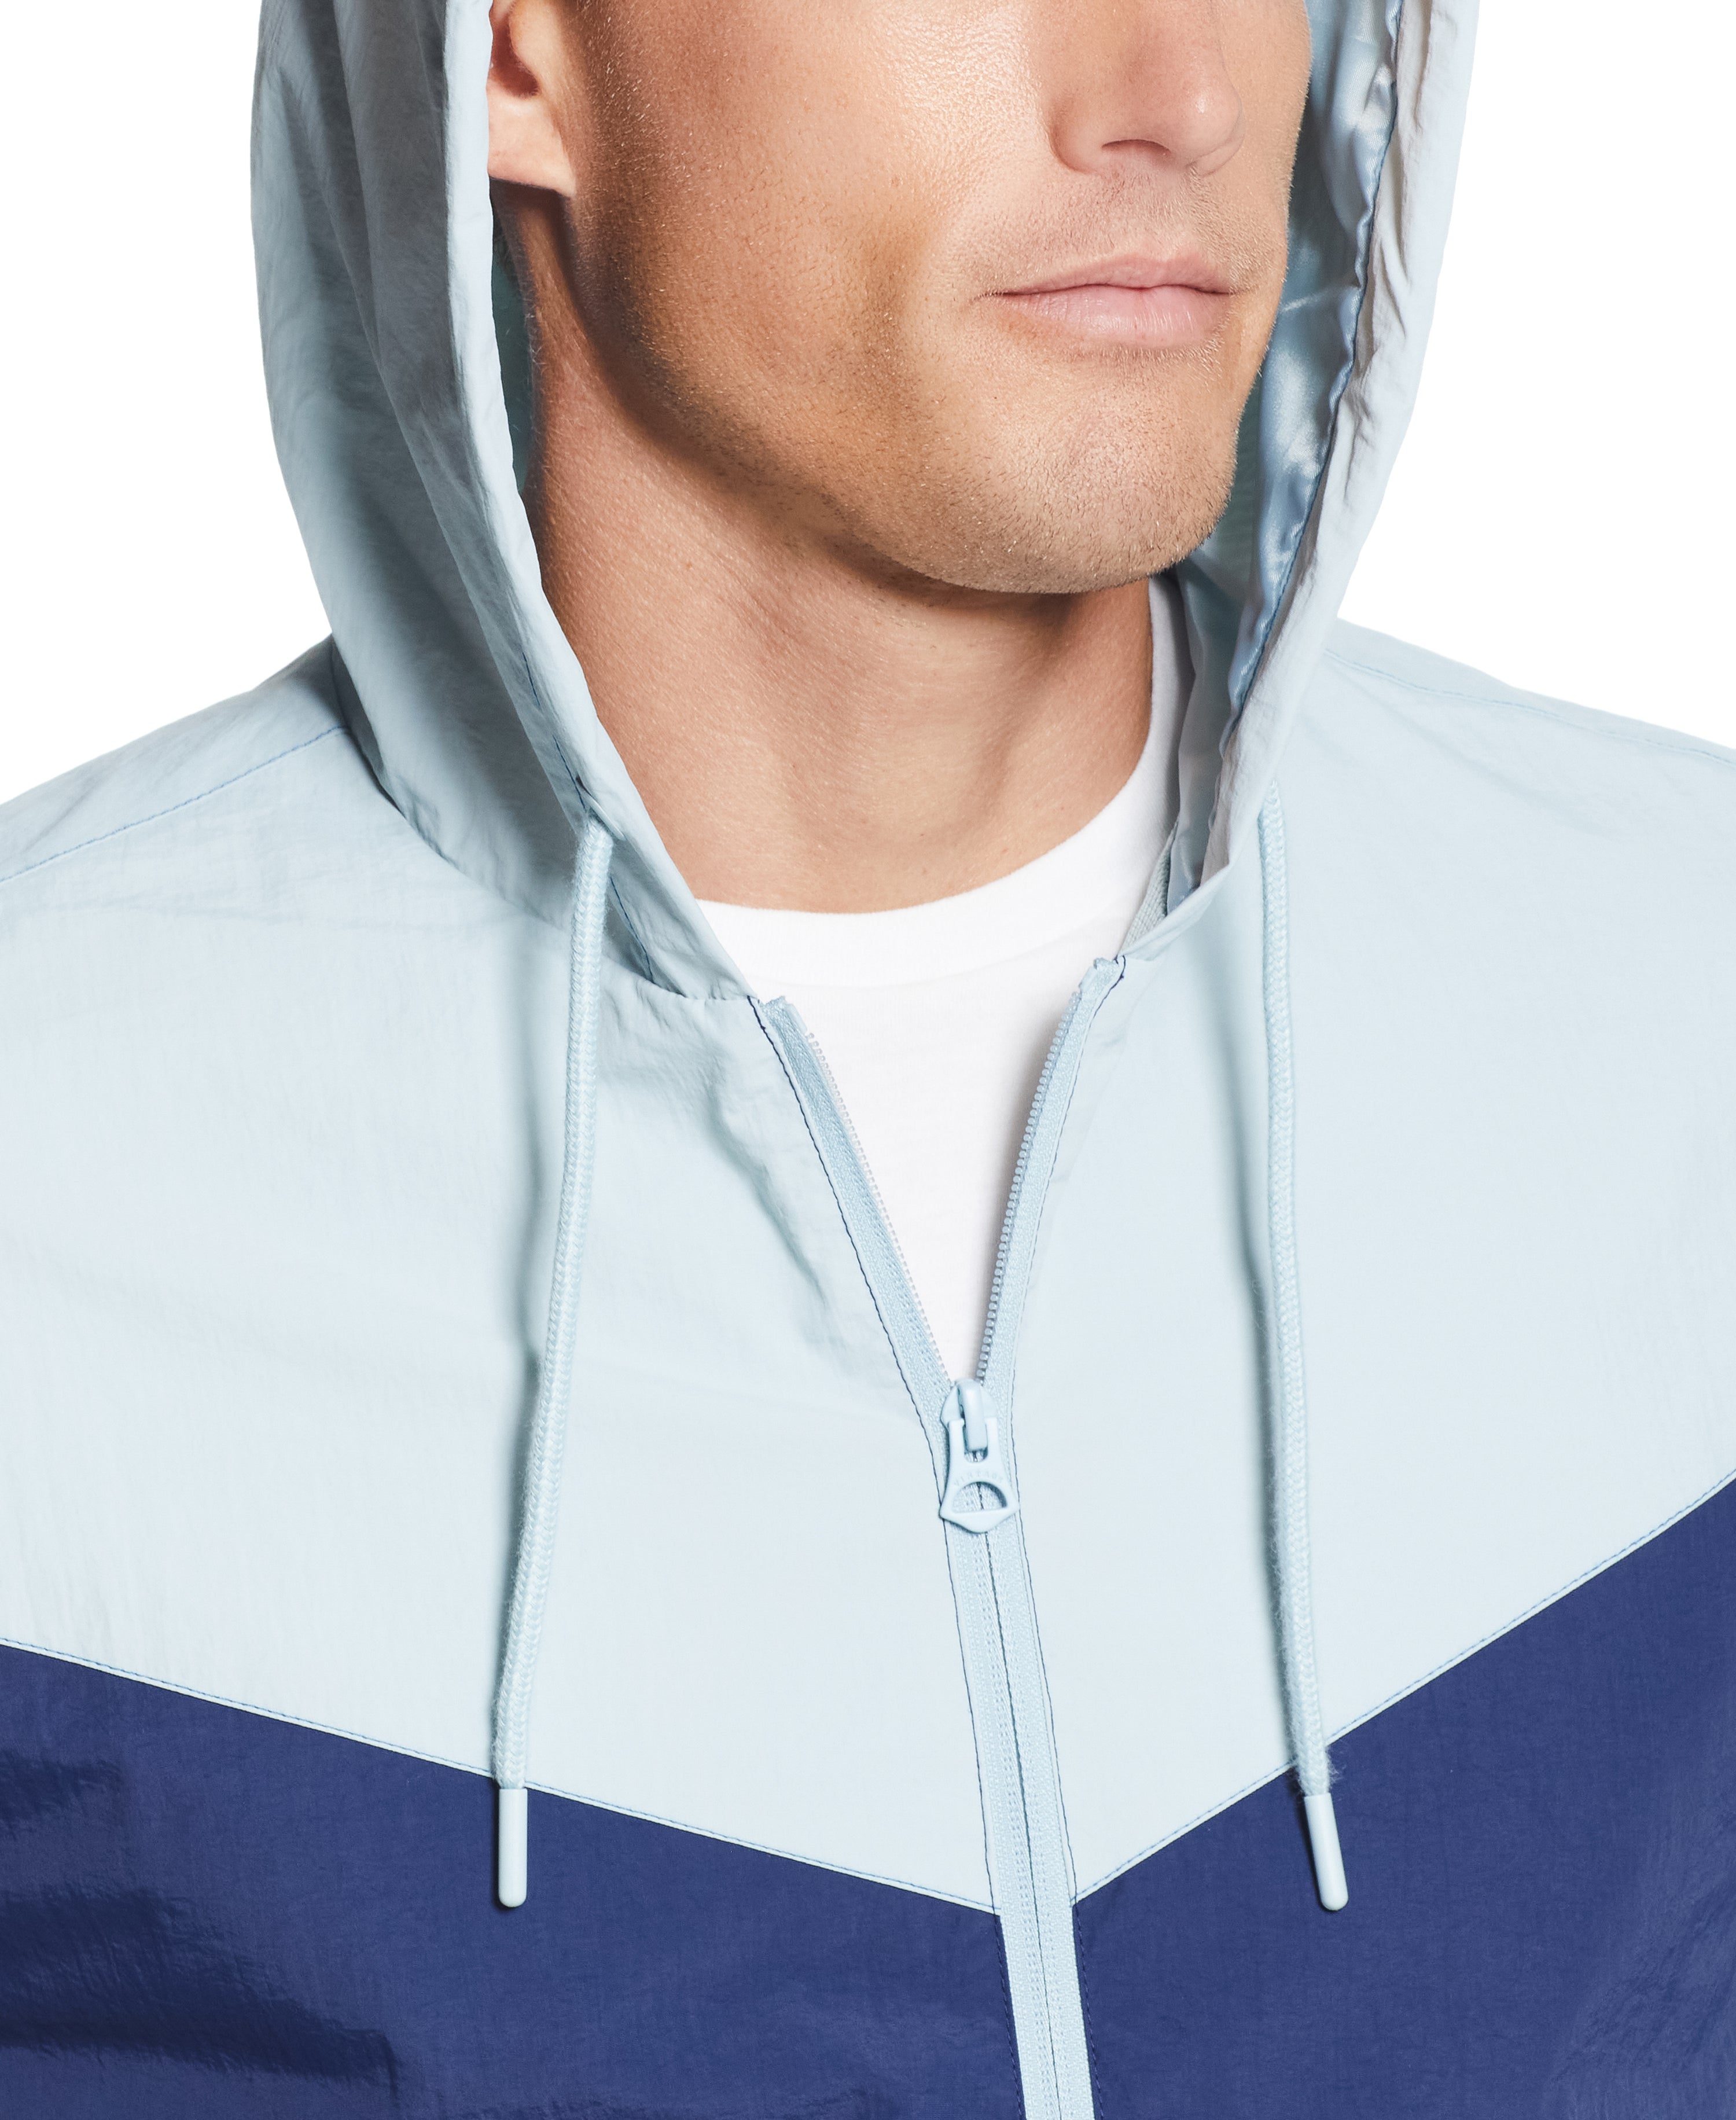 Nylon Zip Up Color Block with Hood in Federal Blue